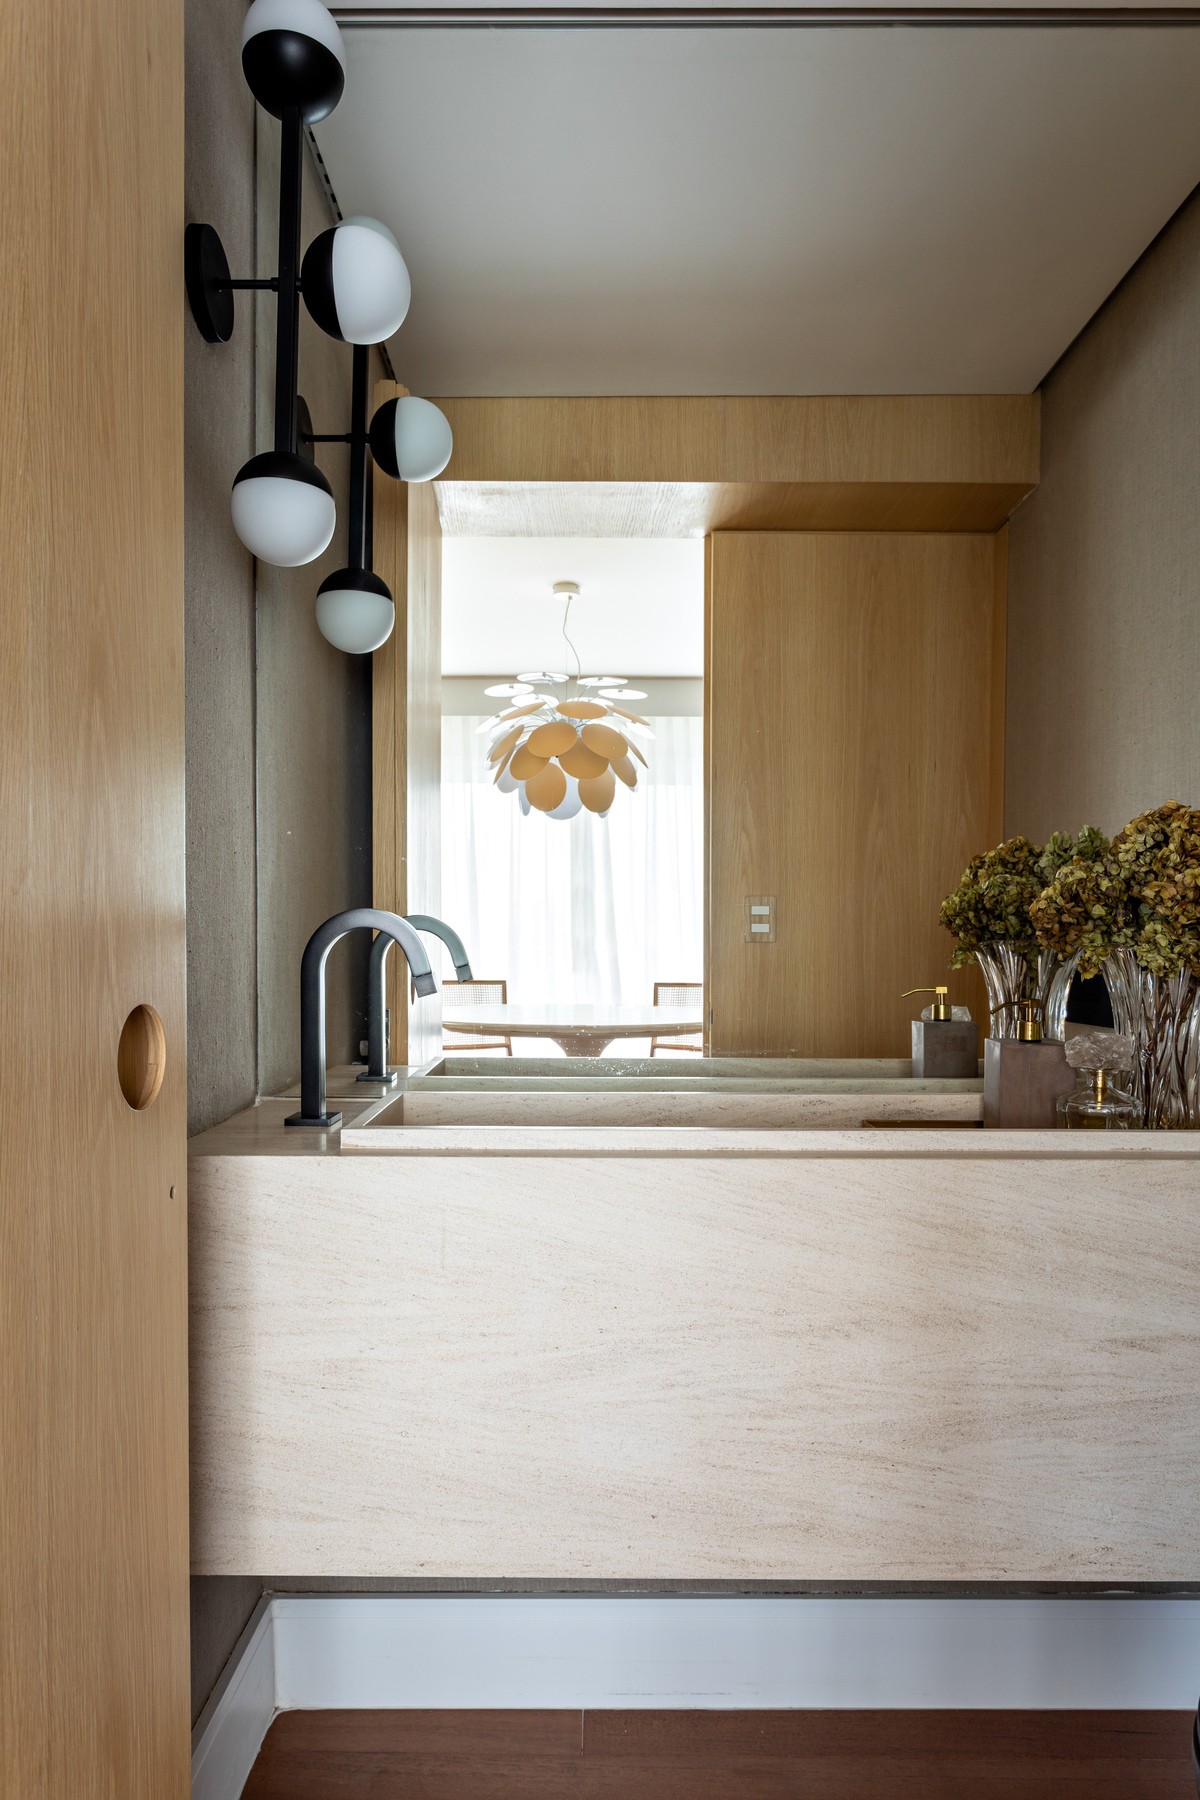 WASHBASIN |  Next to the dining room, the toilet has pieces made of wood (Photo: Fran Parente / Disclosure)